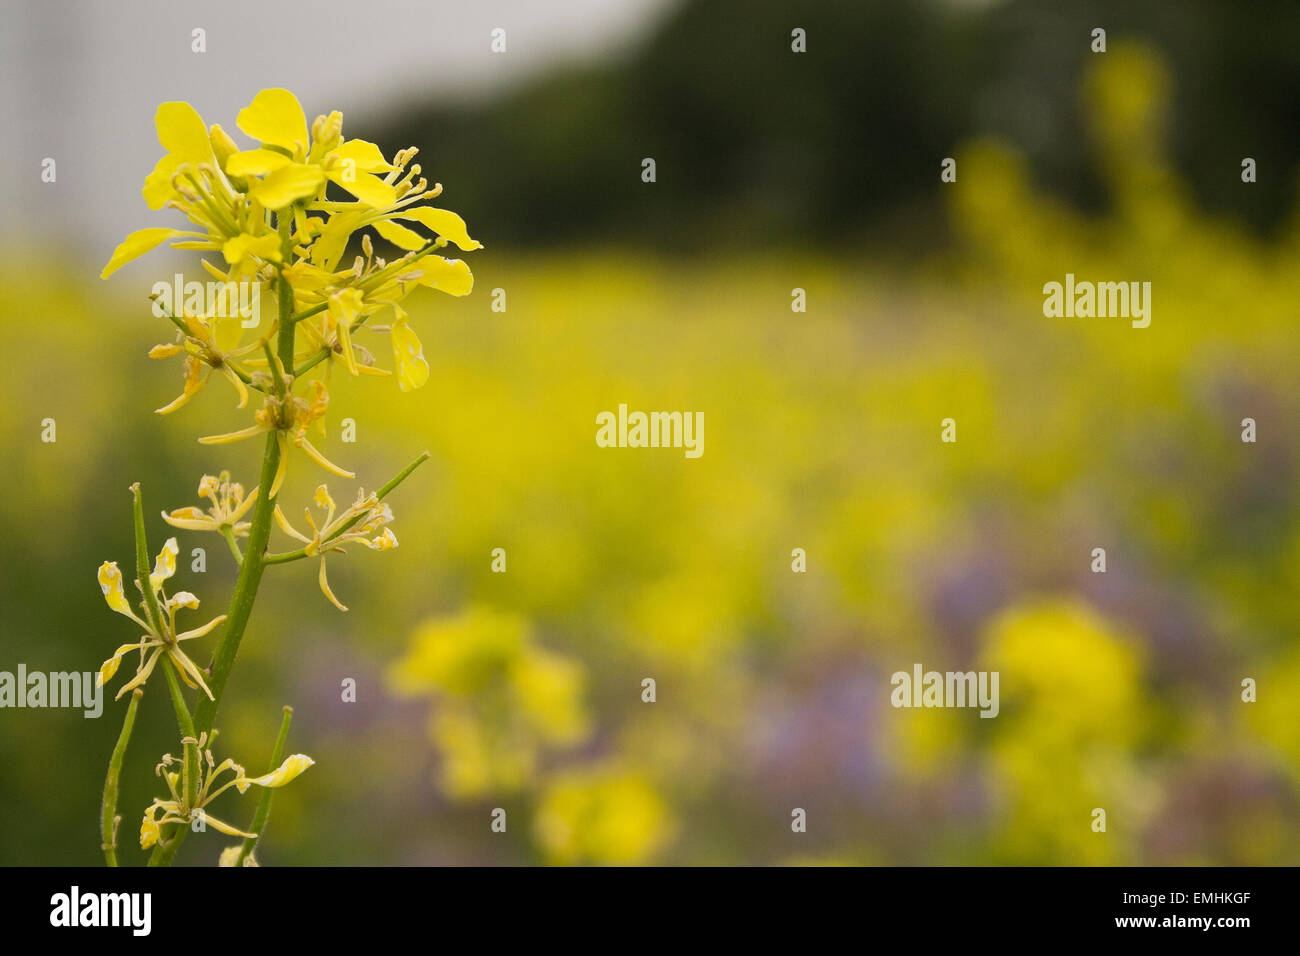 Close up of a Rapeseed plant in a field of Rapeseed Stock Photo